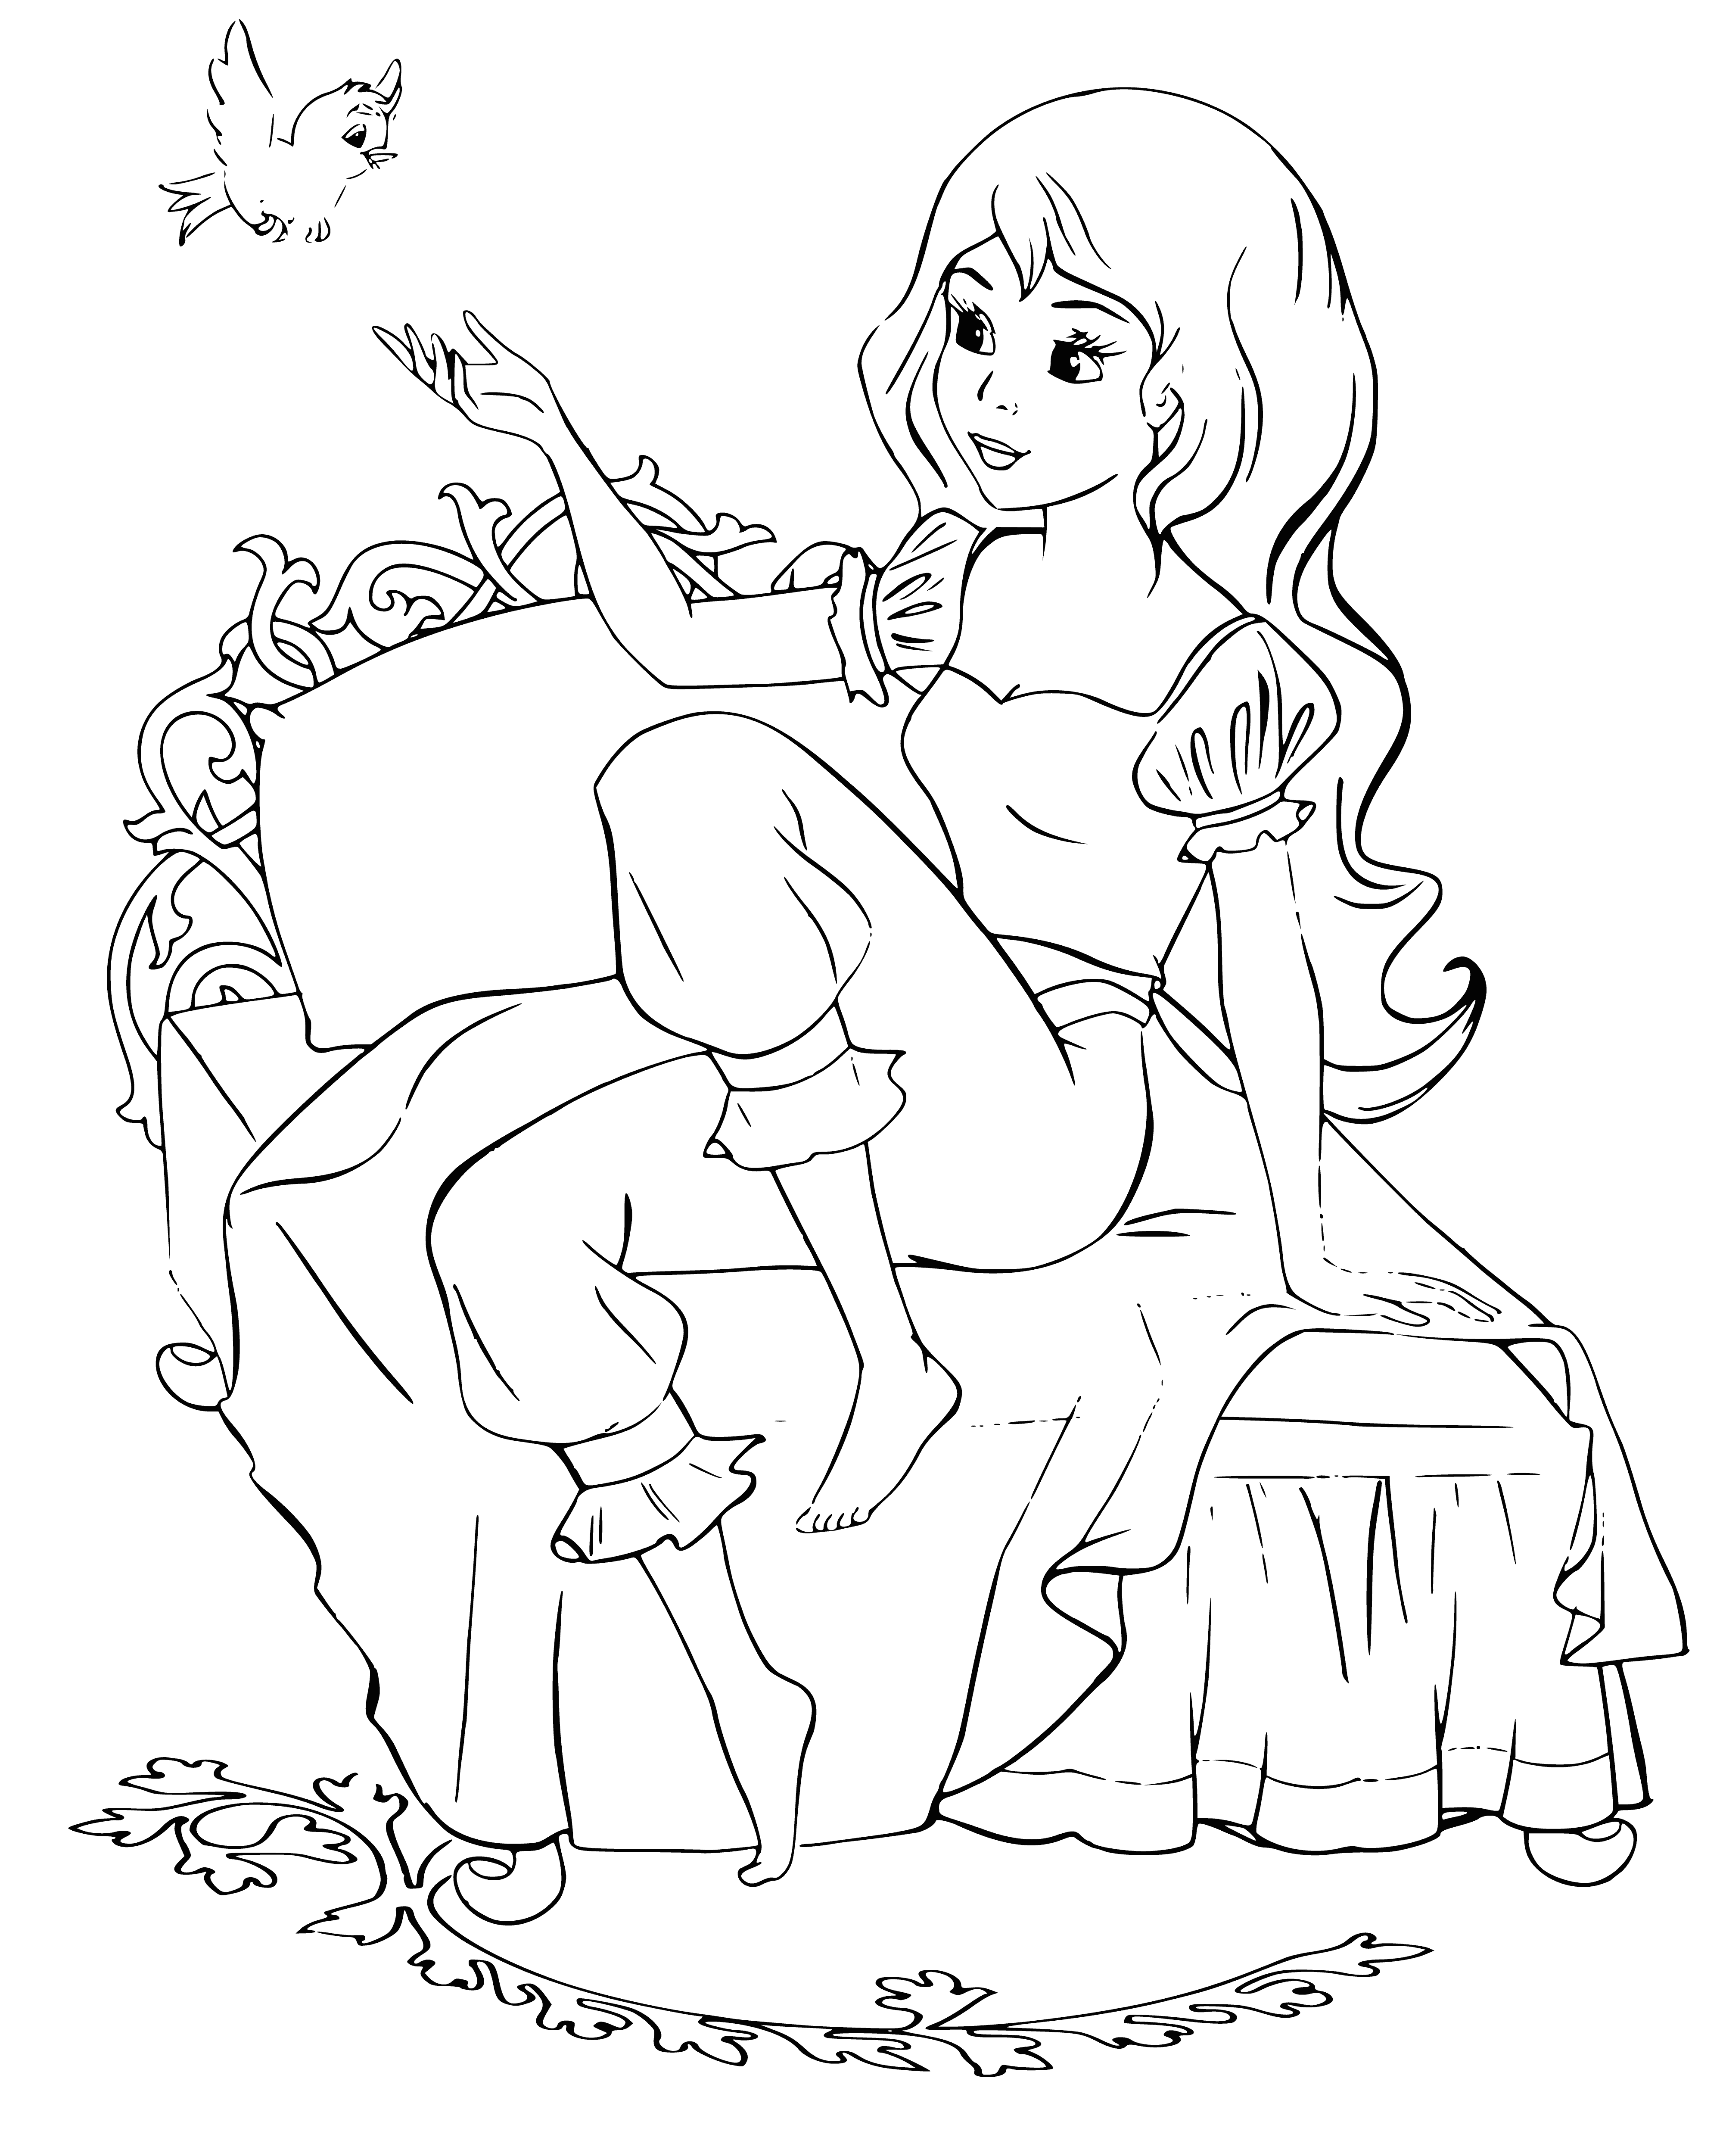 coloring page: Princess in white dress w/blue sash, holding wand & gold crown, in front of castle.